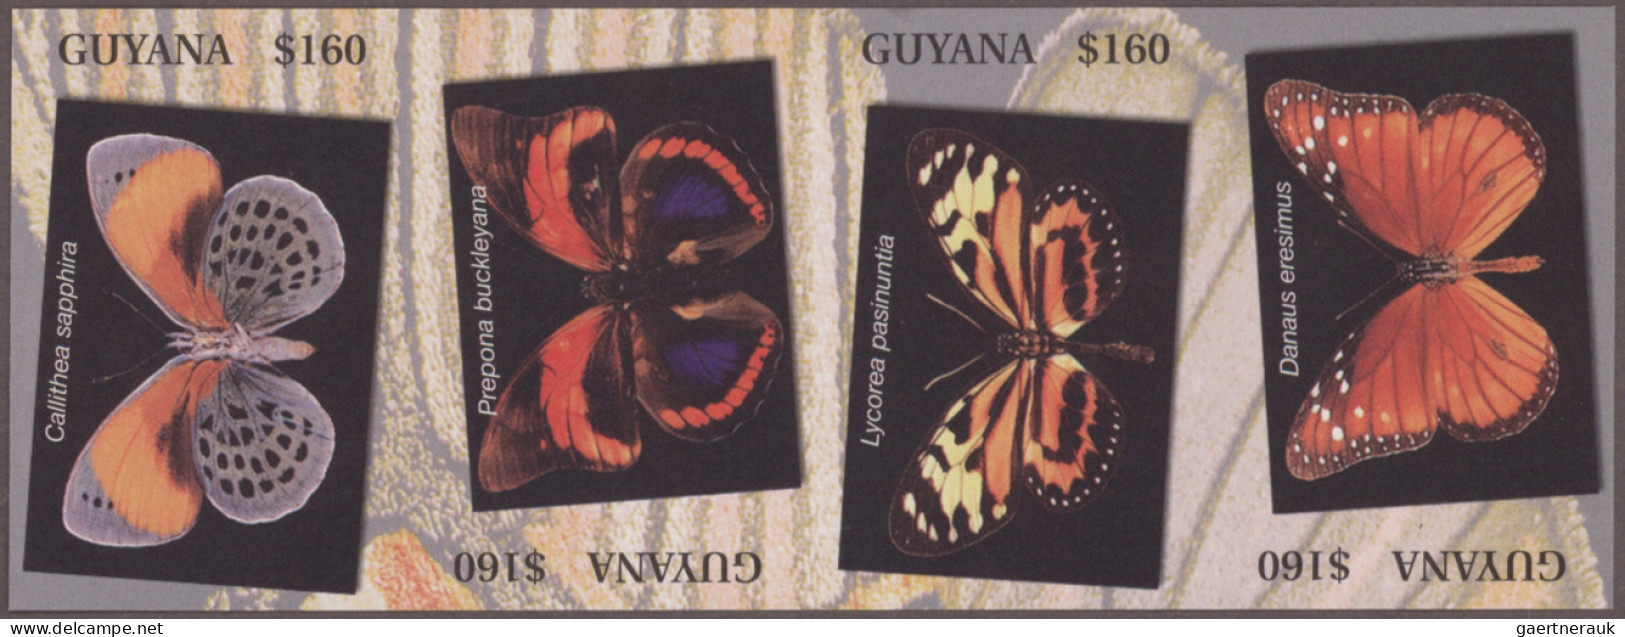 Guyana: 2000/2010. Collection containing 1091 IMPERFORATE stamps and 8 IMPERFORA